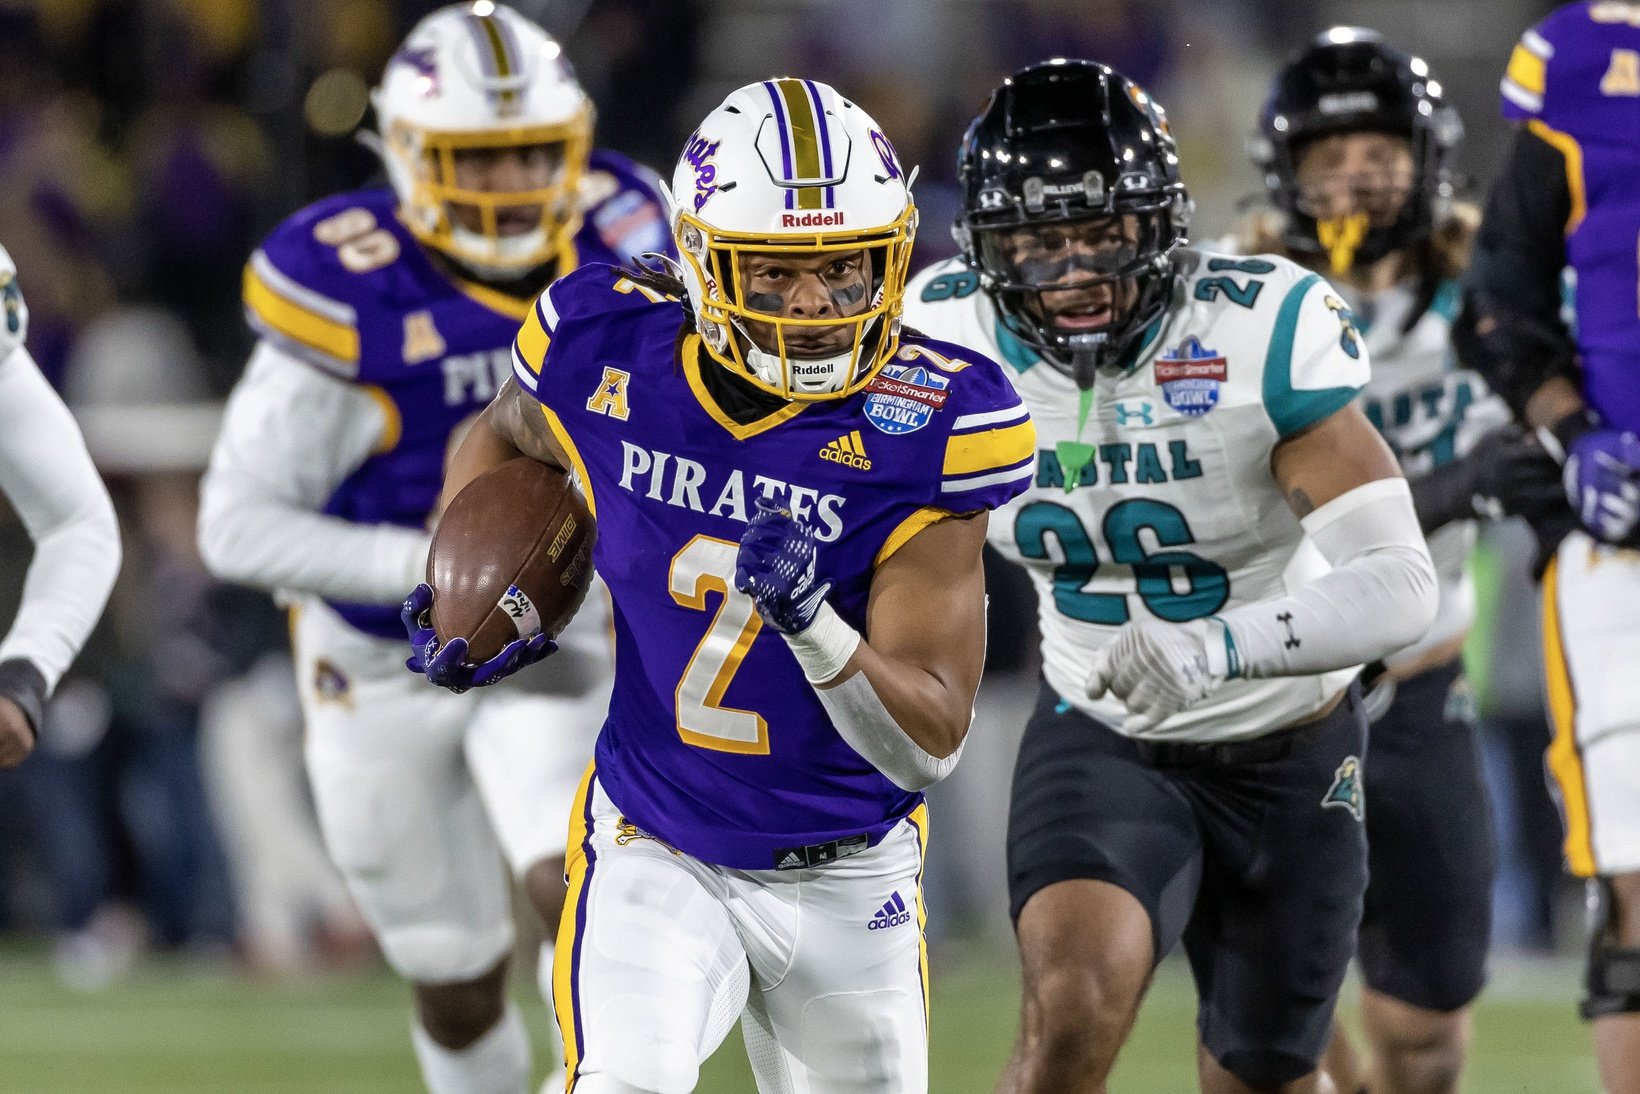 East Carolina 2023 NFL Draft Scouting Reports Include Holton